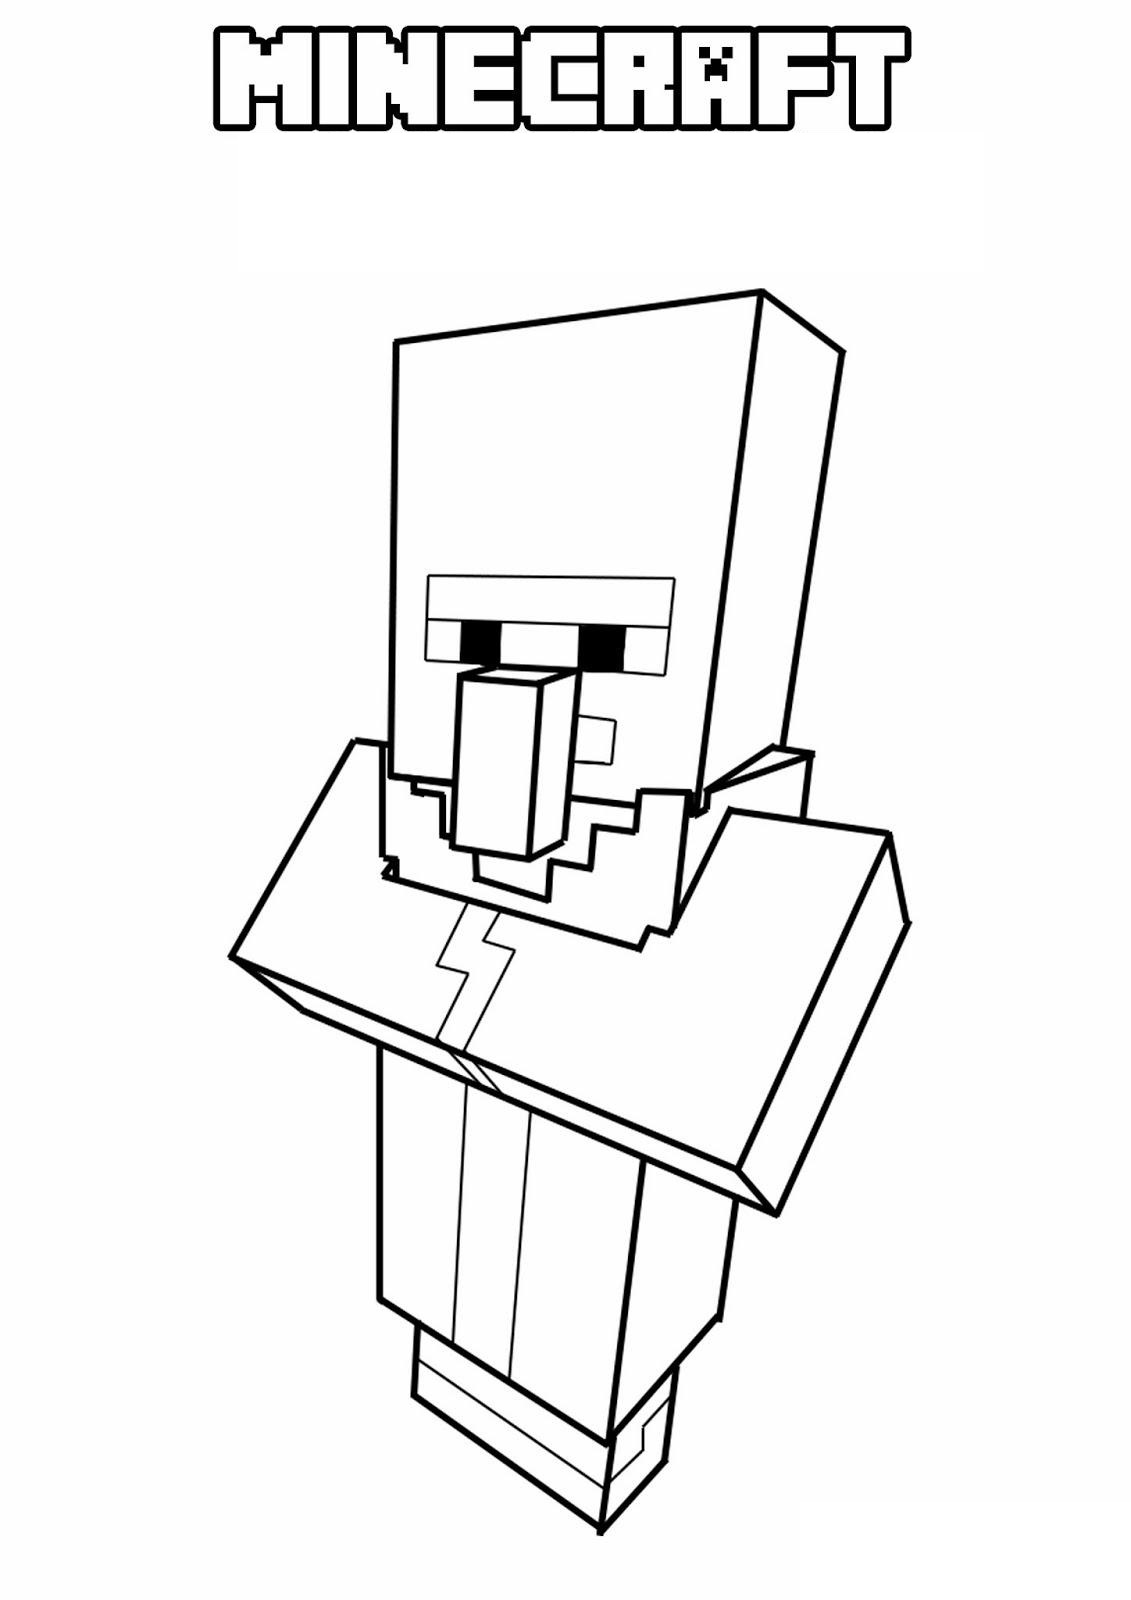 Villager Minecraft Coloring Page - Free Printable Coloring Pages for Kids